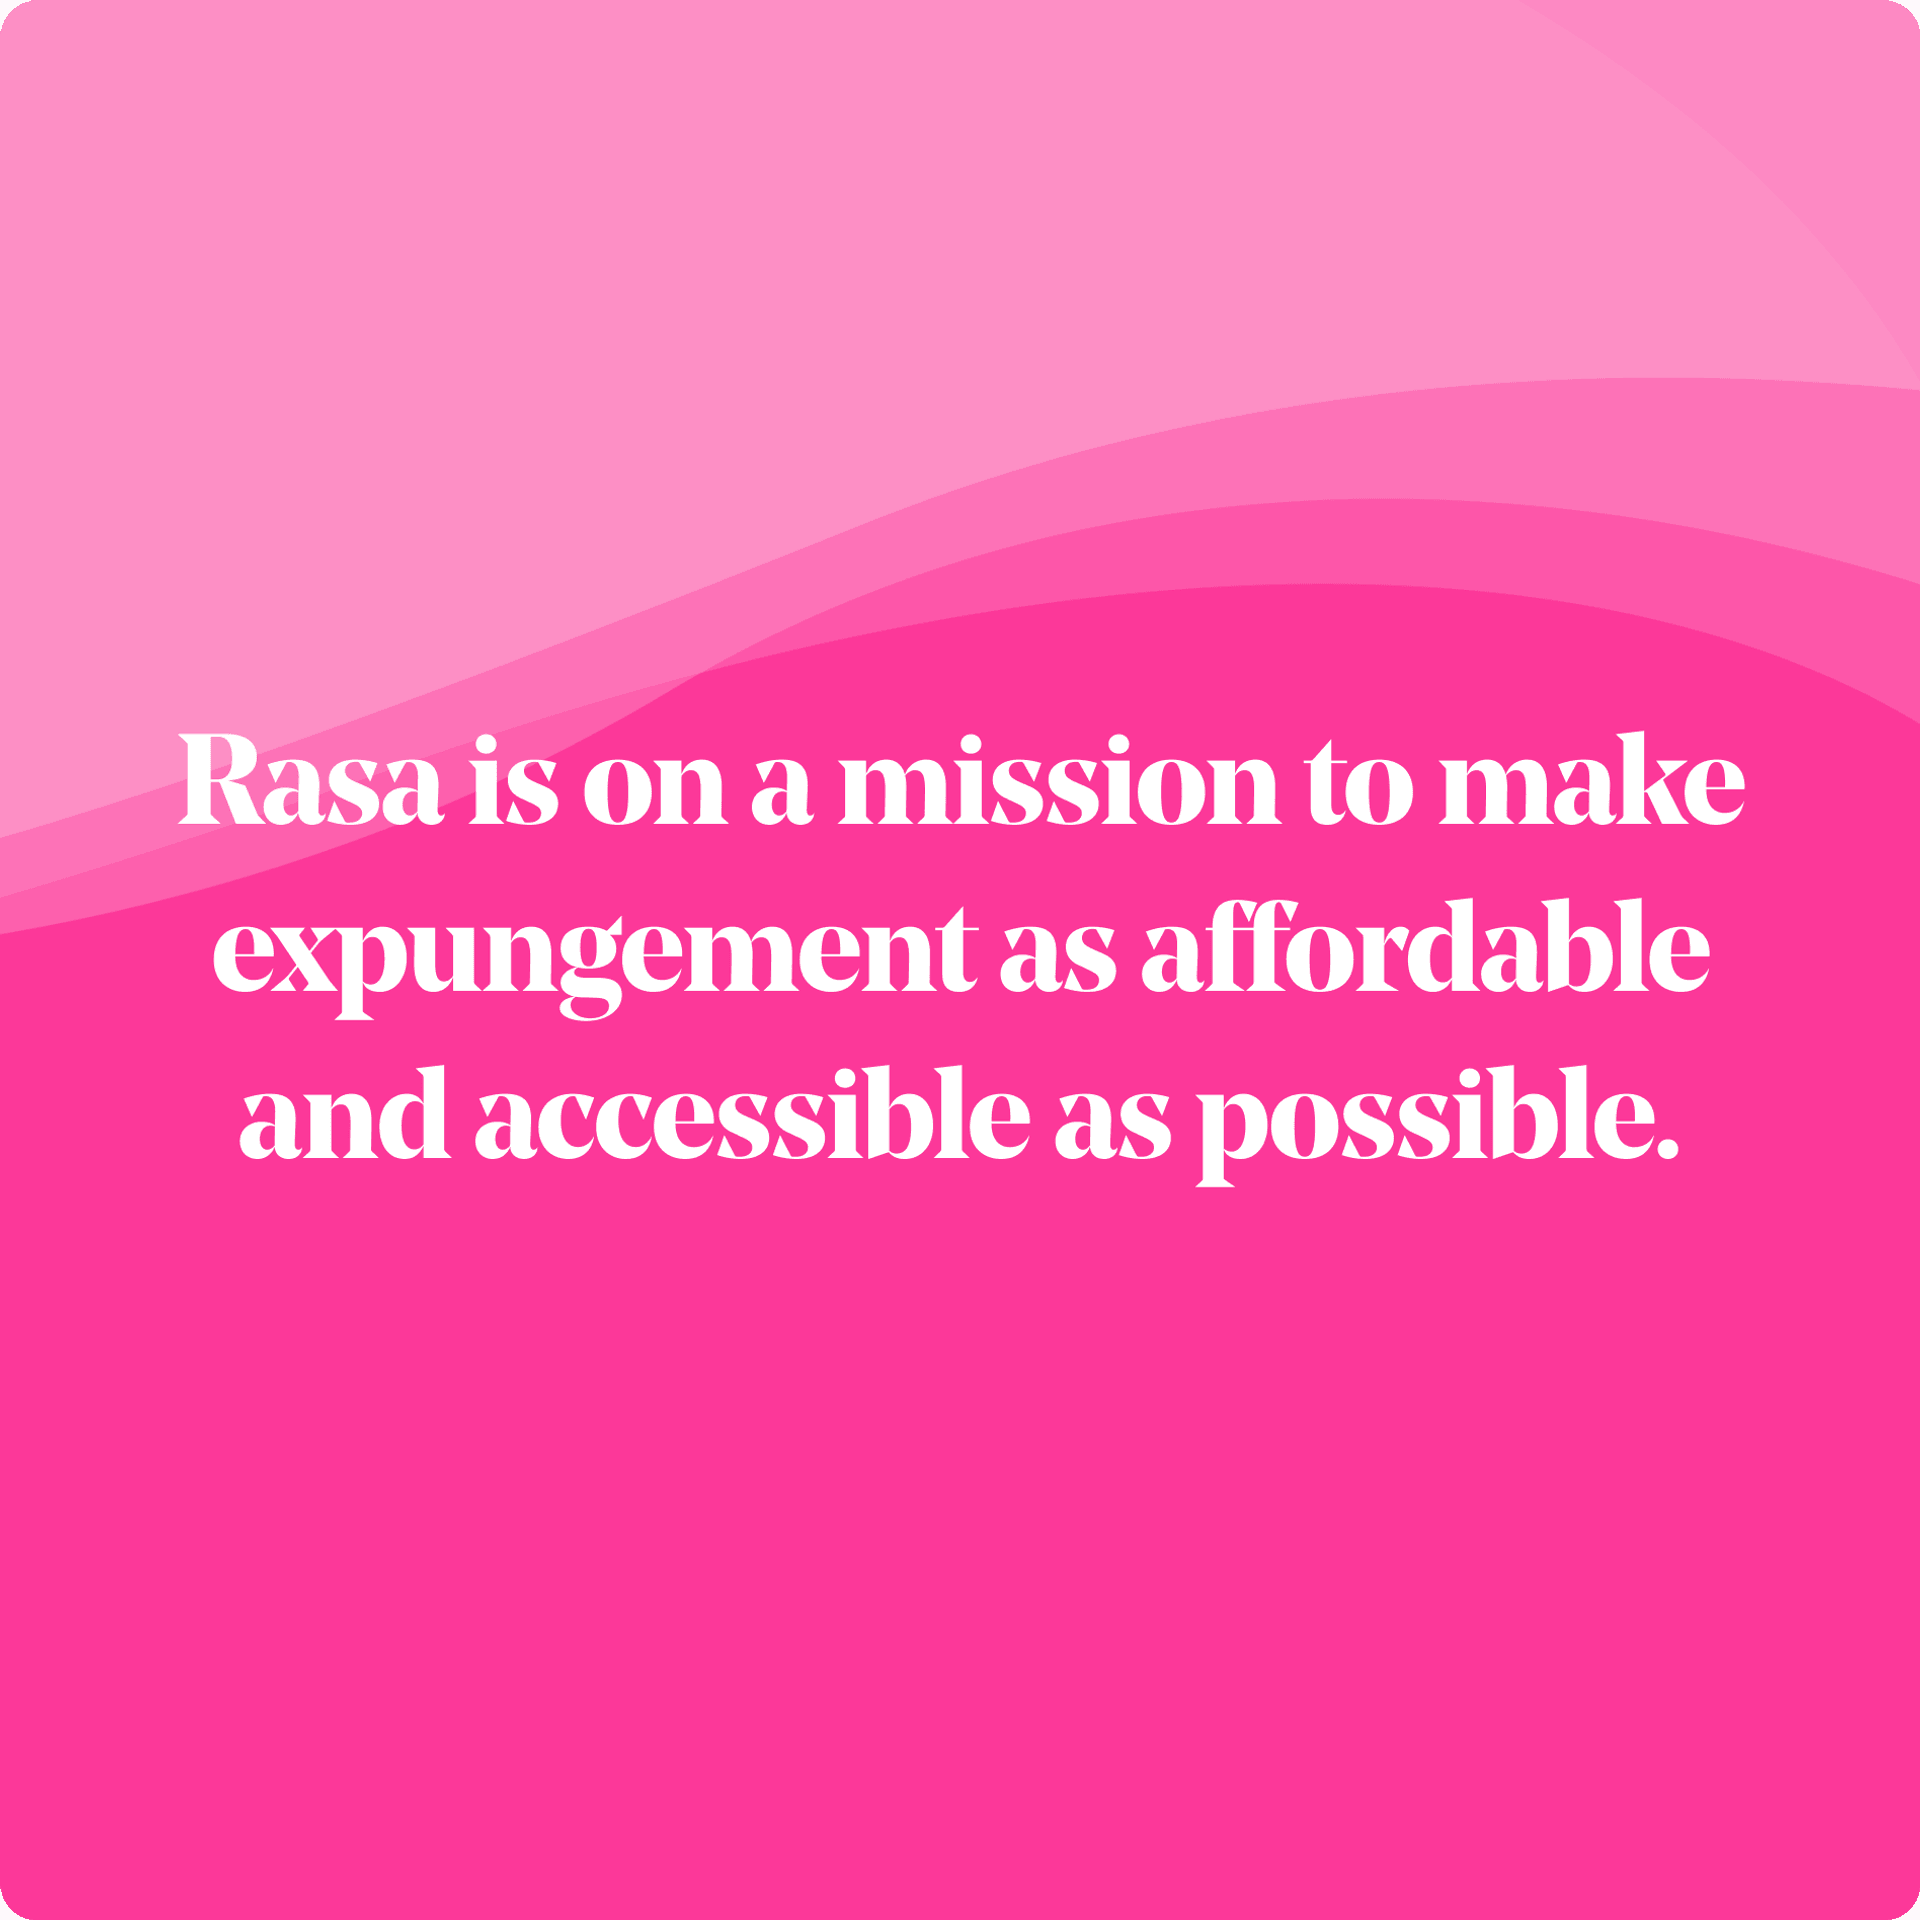 Rasa is on a mission to make expungement as affordable and accessible as possible